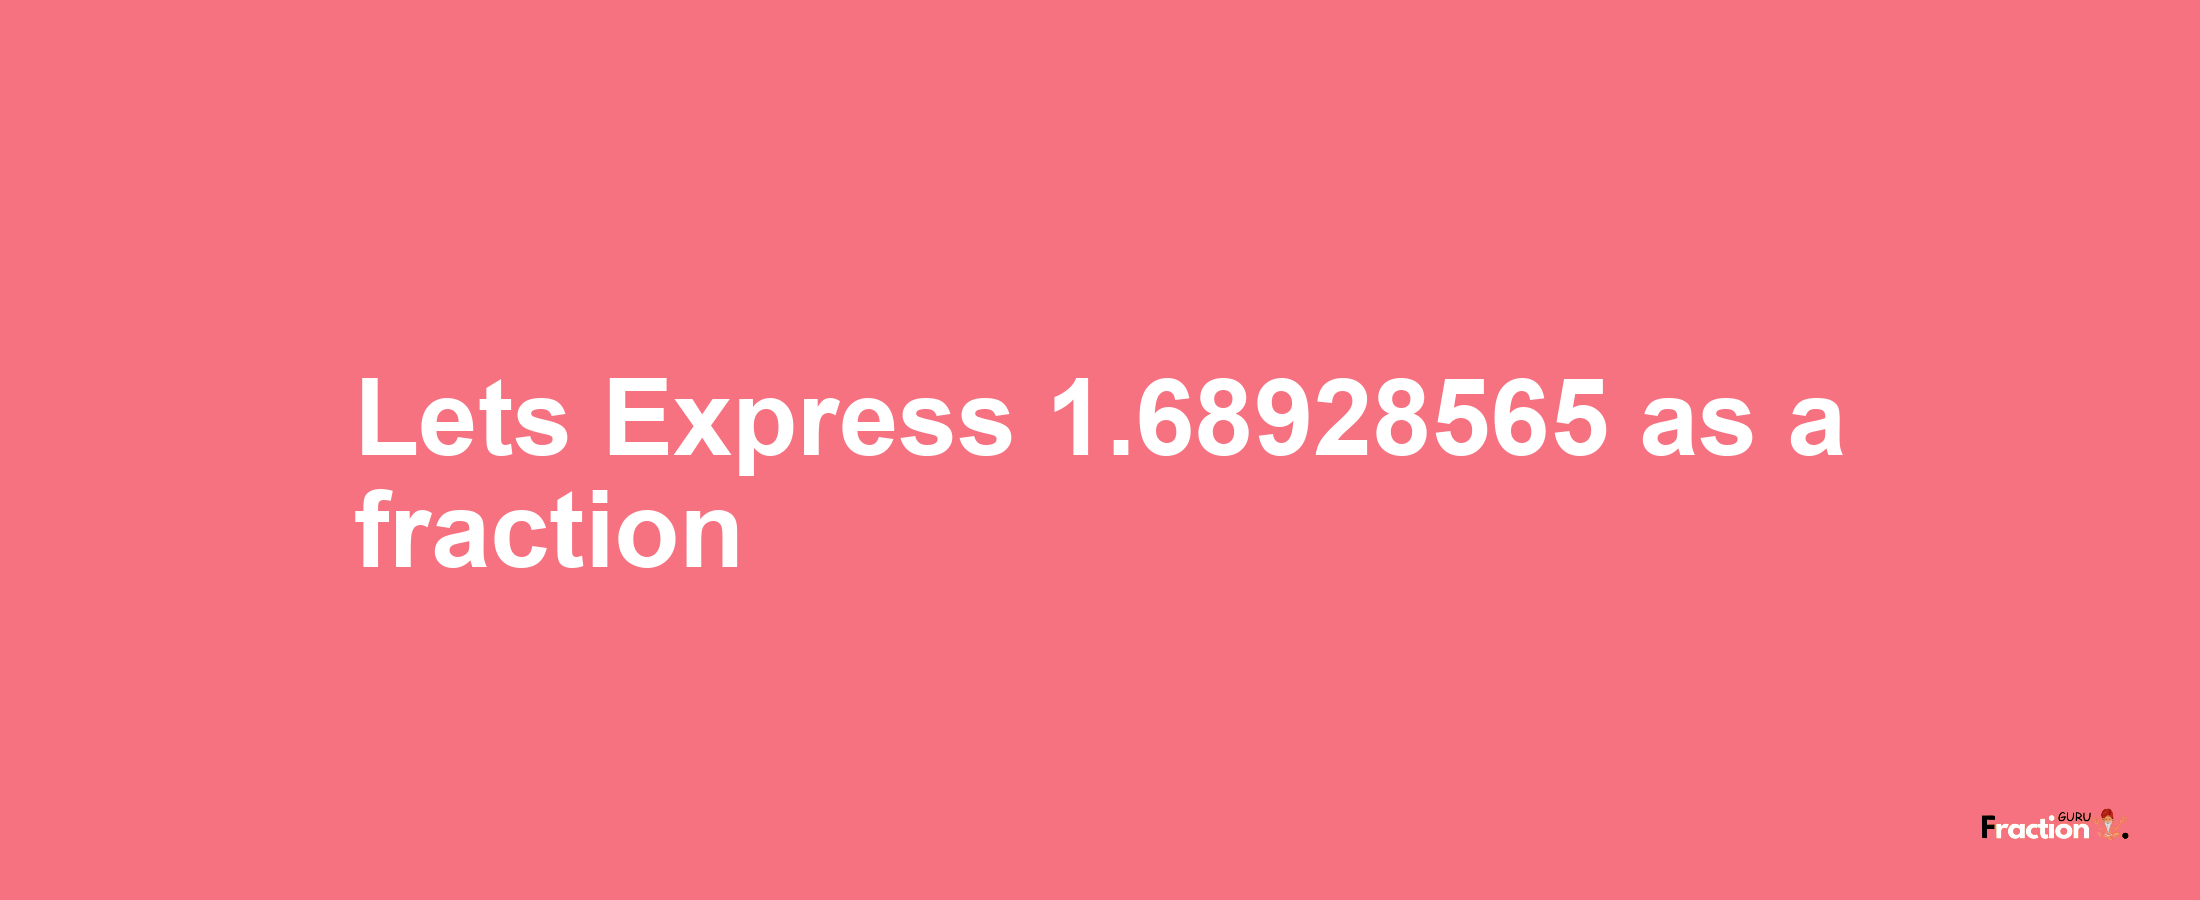 Lets Express 1.68928565 as afraction